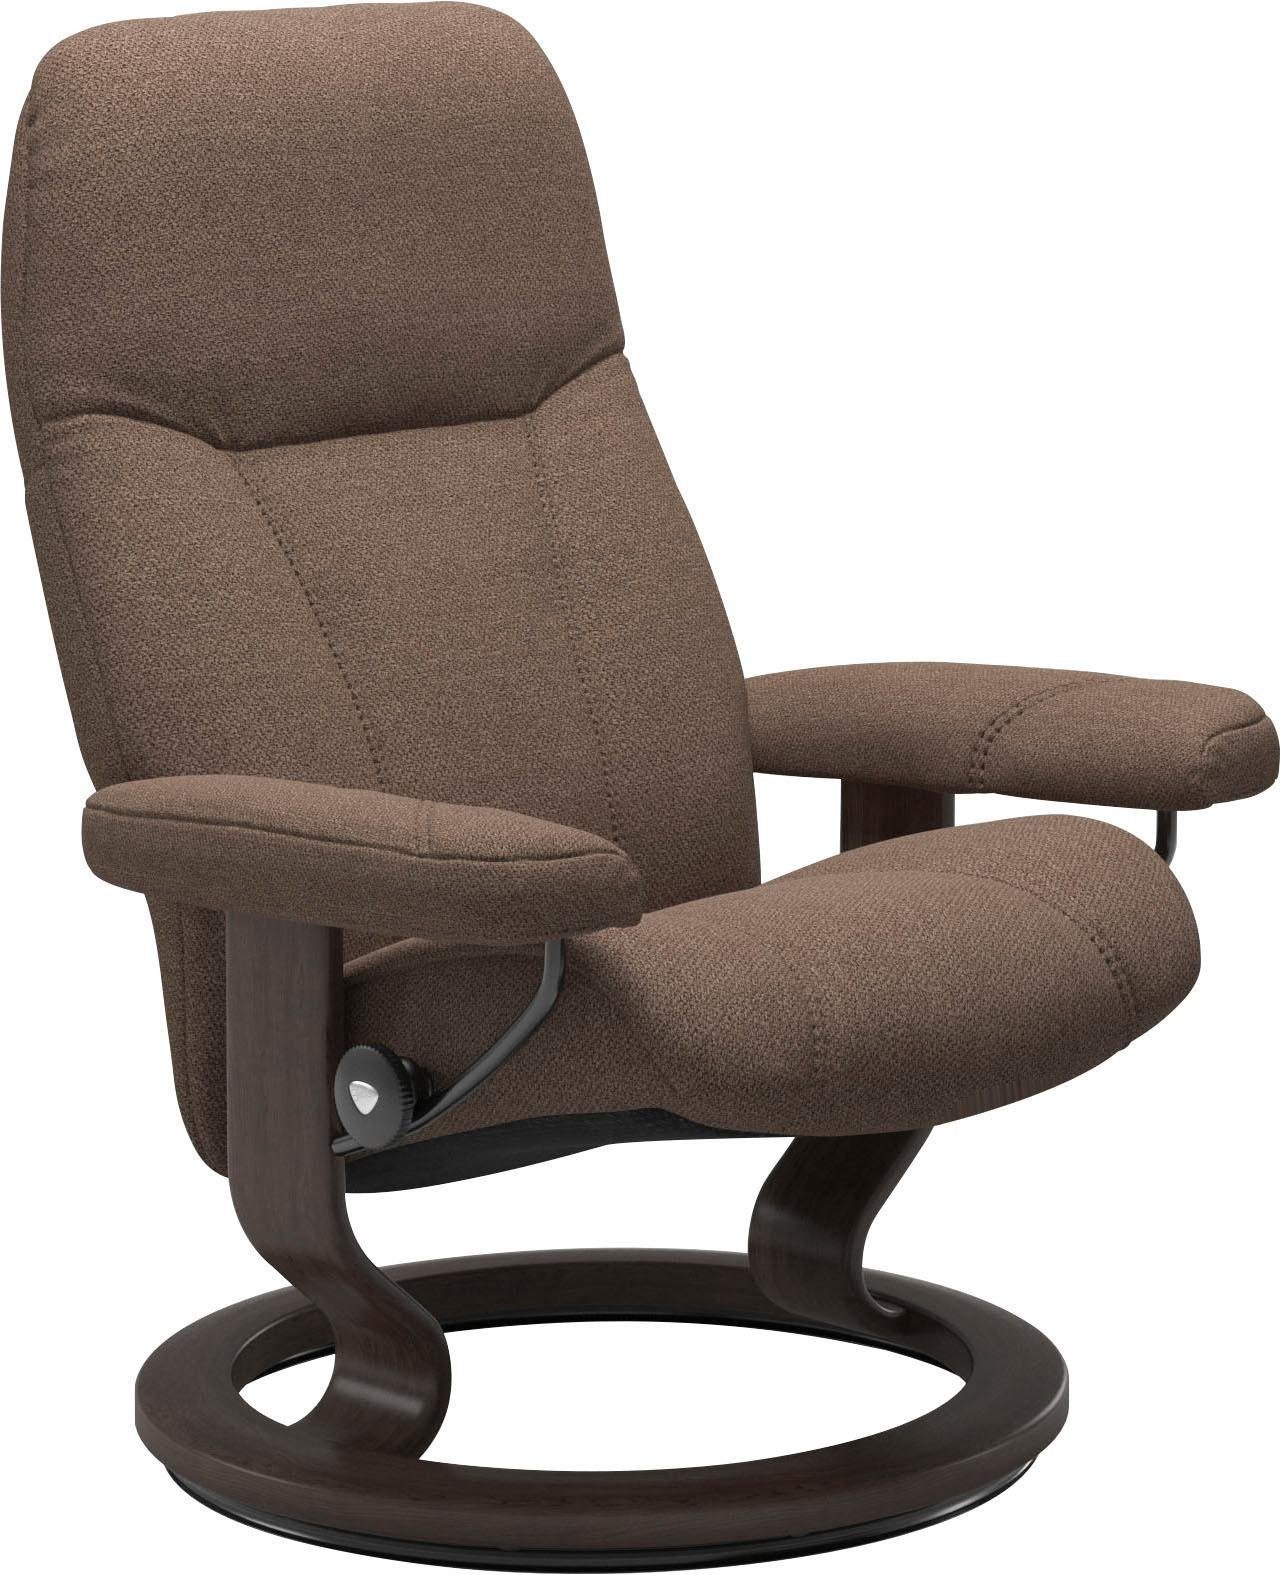 Stressless® Relaxsessel Consul, mit Classic Gestell Größe L, Base, Wenge